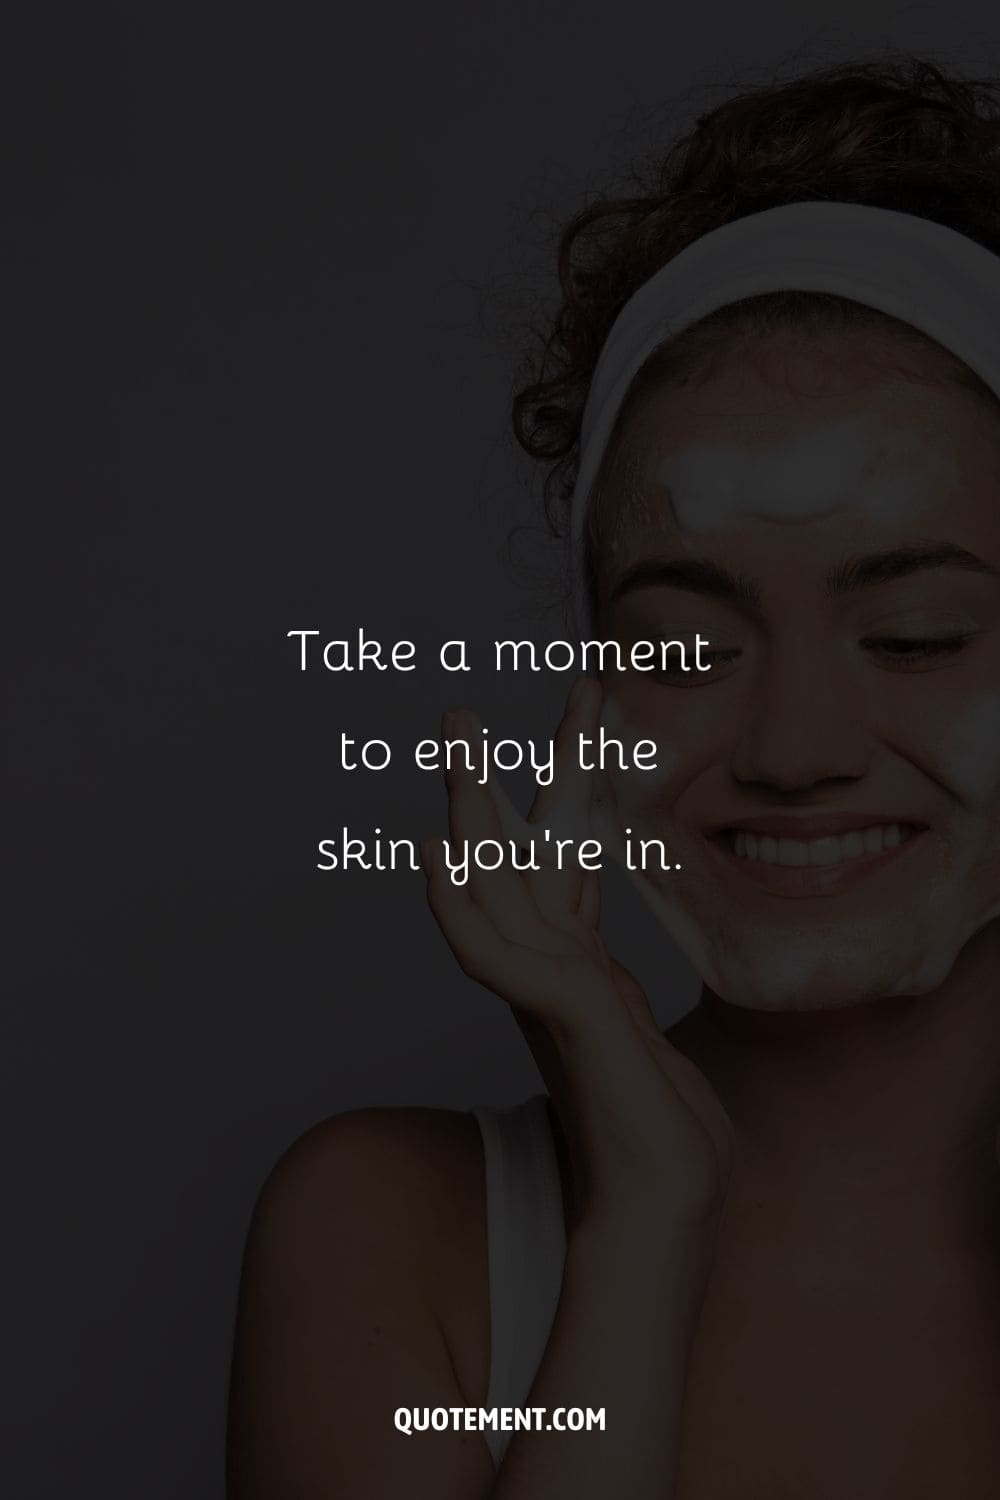 Take a moment to enjoy the skin you’re in.